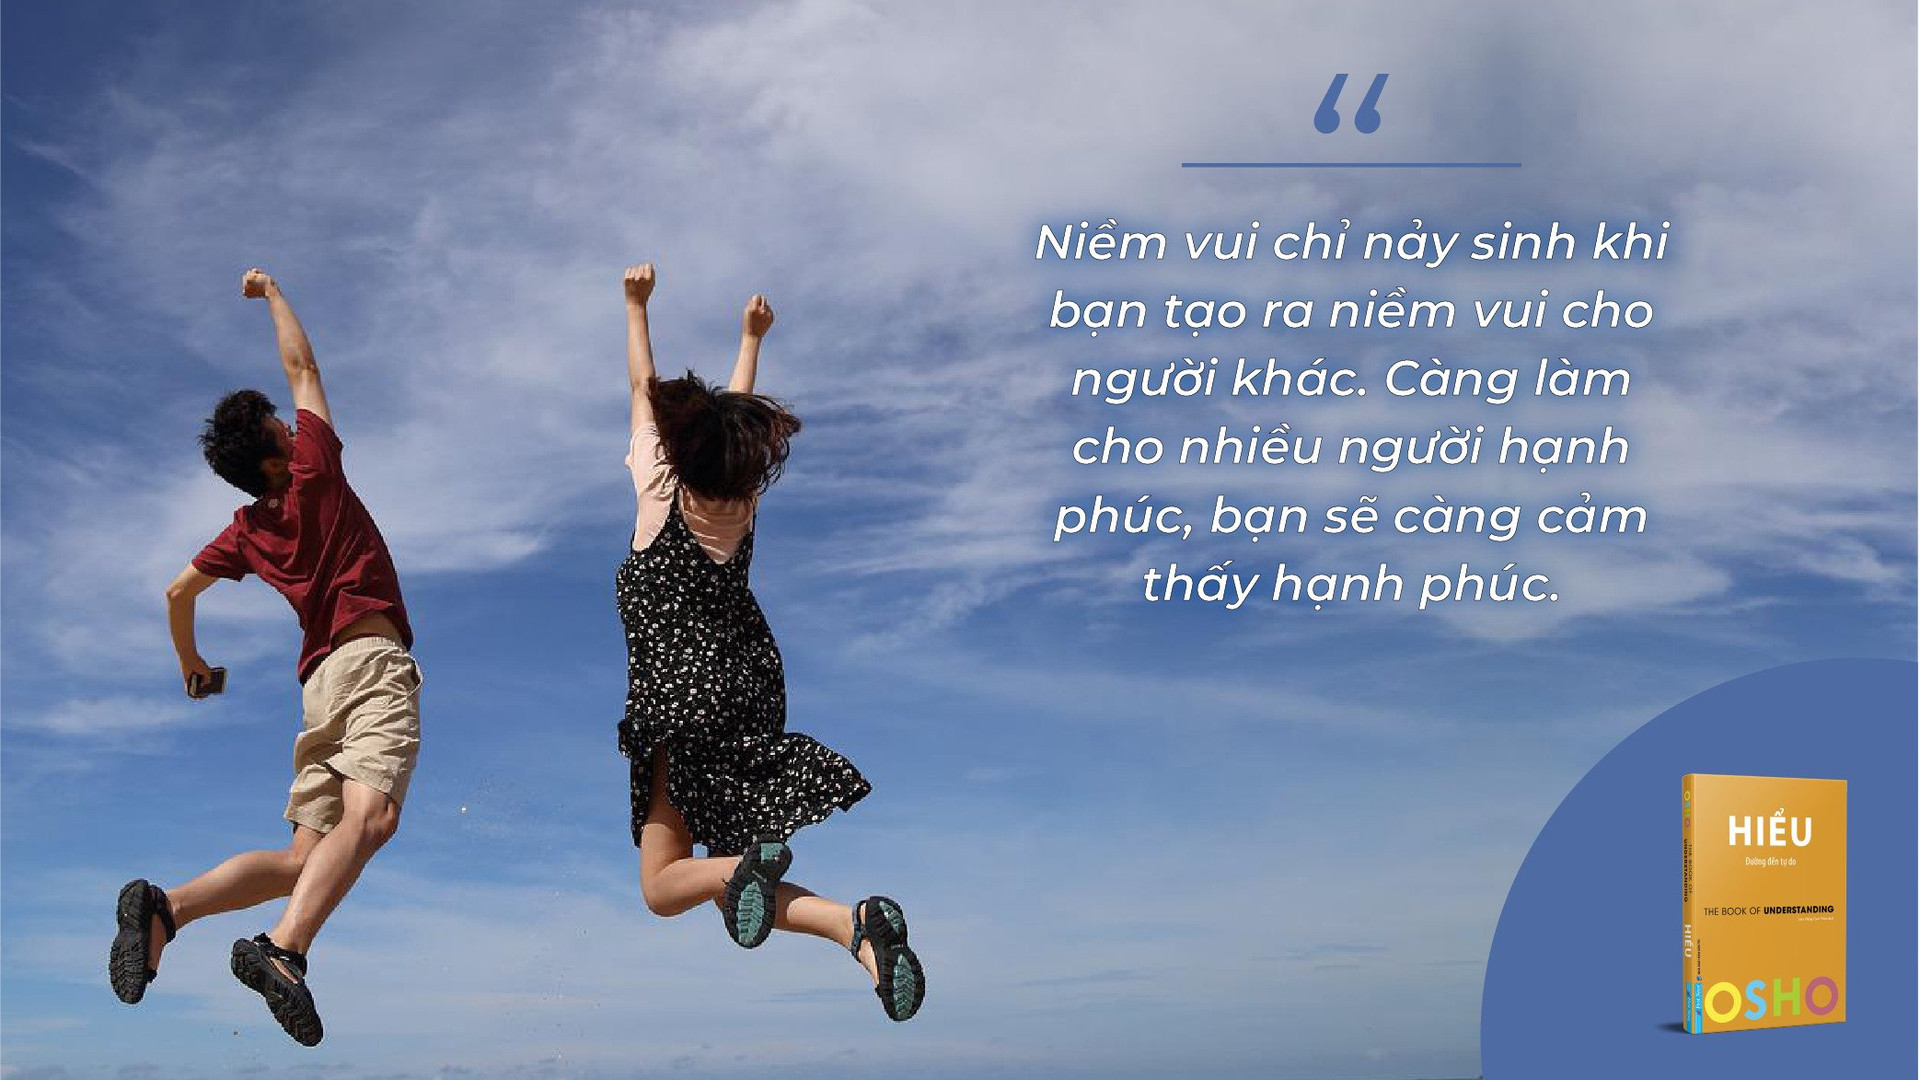 quote_hieu_osho-4-.jpg